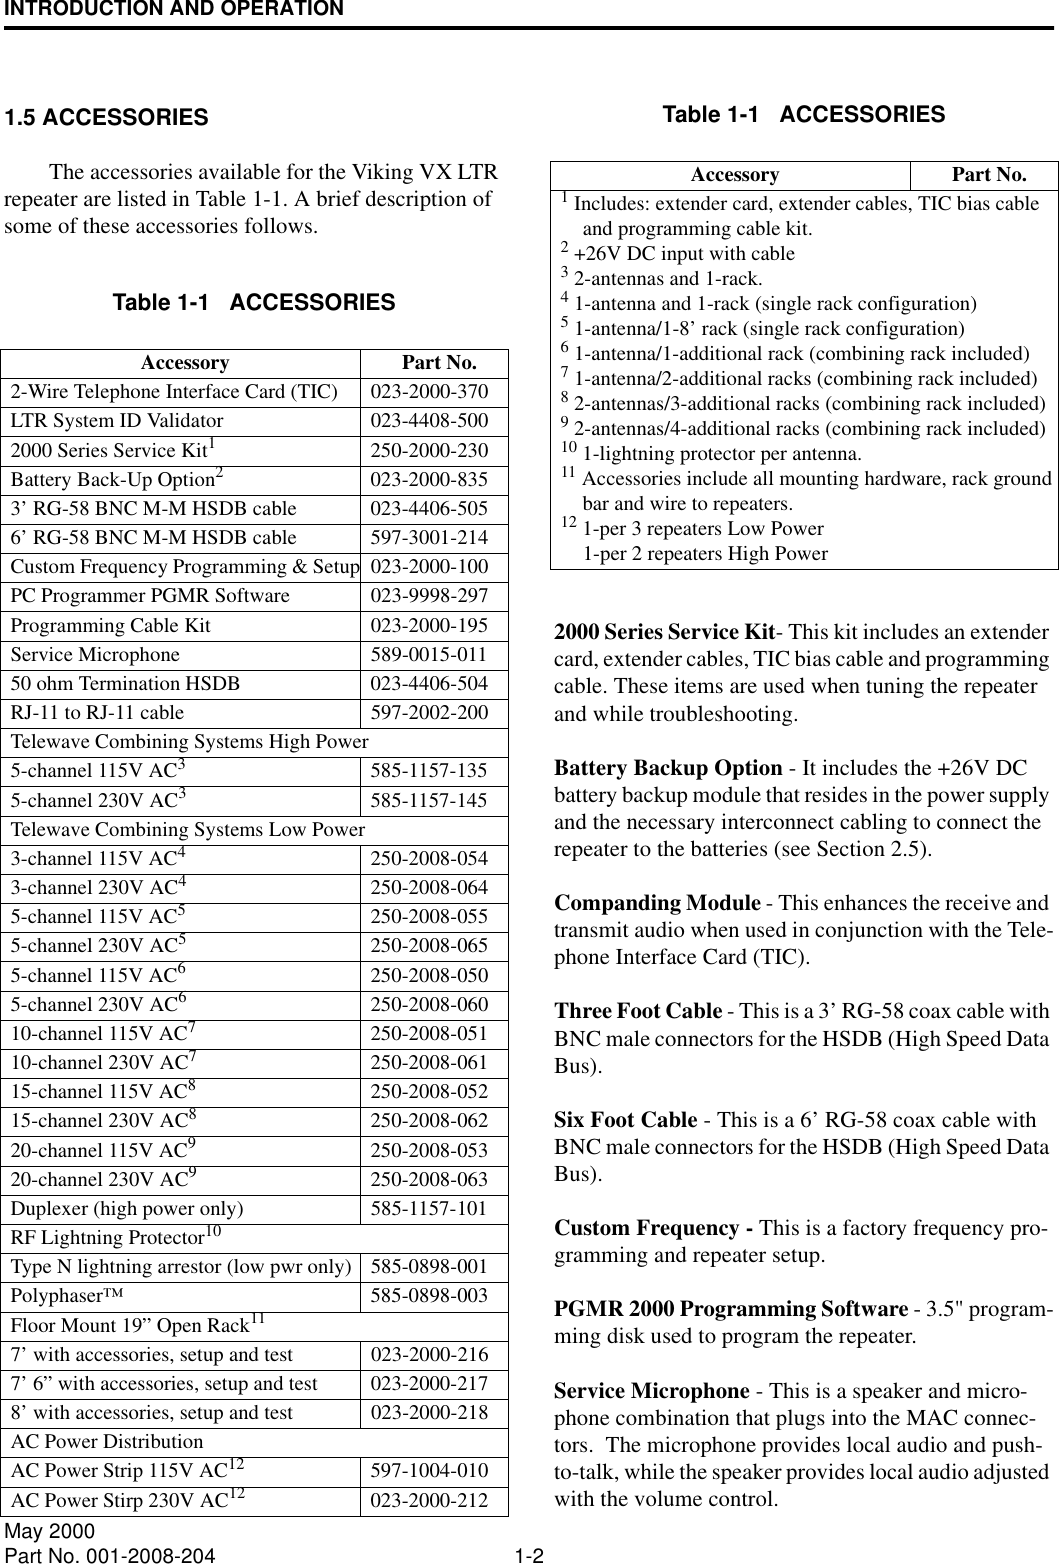 INTRODUCTION AND OPERATION1-2May 2000Part No. 001-2008-2041.5 ACCESSORIESThe accessories available for the Viking VX LTR repeater are listed in Table 1-1. A brief description of some of these accessories follows. 2000 Series Service Kit- This kit includes an extender card, extender cables, TIC bias cable and programming cable. These items are used when tuning the repeater and while troubleshooting.Battery Backup Option - It includes the +26V DC battery backup module that resides in the power supply and the necessary interconnect cabling to connect the repeater to the batteries (see Section 2.5).Companding Module - This enhances the receive and transmit audio when used in conjunction with the Tele-phone Interface Card (TIC).Three Foot Cable - This is a 3’ RG-58 coax cable with BNC male connectors for the HSDB (High Speed Data Bus).Six Foot Cable - This is a 6’ RG-58 coax cable with BNC male connectors for the HSDB (High Speed Data Bus).Custom Frequency - This is a factory frequency pro-gramming and repeater setup.PGMR 2000 Programming Software - 3.5&quot; program-ming disk used to program the repeater.Service Microphone - This is a speaker and micro-phone combination that plugs into the MAC connec-tors.  The microphone provides local audio and push-to-talk, while the speaker provides local audio adjusted with the volume control.Table 1-1   ACCESSORIESAccessory Part No.2-Wire Telephone Interface Card (TIC) 023-2000-370LTR System ID Validator 023-4408-5002000 Series Service Kit1250-2000-230Battery Back-Up Option2023-2000-8353’ RG-58 BNC M-M HSDB cable 023-4406-5056’ RG-58 BNC M-M HSDB cable 597-3001-214Custom Frequency Programming &amp; Setup 023-2000-100PC Programmer PGMR Software 023-9998-297Programming Cable Kit 023-2000-195Service Microphone 589-0015-01150 ohm Termination HSDB 023-4406-504RJ-11 to RJ-11 cable 597-2002-200Telewave Combining Systems High Power5-channel 115V AC3585-1157-1355-channel 230V AC3585-1157-145Telewave Combining Systems Low Power3-channel 115V AC4250-2008-0543-channel 230V AC4250-2008-0645-channel 115V AC5250-2008-0555-channel 230V AC5250-2008-0655-channel 115V AC6250-2008-0505-channel 230V AC6250-2008-06010-channel 115V AC7250-2008-05110-channel 230V AC7250-2008-06115-channel 115V AC8250-2008-05215-channel 230V AC8250-2008-06220-channel 115V AC9250-2008-05320-channel 230V AC9250-2008-063Duplexer (high power only) 585-1157-101RF Lightning Protector10Type N lightning arrestor (low pwr only) 585-0898-001Polyphaser™585-0898-003Floor Mount 19” Open Rack117’ with accessories, setup and test 023-2000-2167’ 6” with accessories, setup and test 023-2000-2178’ with accessories, setup and test 023-2000-218AC Power DistributionAC Power Strip 115V AC12 597-1004-010AC Power Stirp 230V AC12 023-2000-2121 Includes: extender card, extender cables, TIC bias cable and programming cable kit.2 +26V DC input with cable3 2-antennas and 1-rack.4 1-antenna and 1-rack (single rack configuration)5 1-antenna/1-8’ rack (single rack configuration)6 1-antenna/1-additional rack (combining rack included)7 1-antenna/2-additional racks (combining rack included)8 2-antennas/3-additional racks (combining rack included)9 2-antennas/4-additional racks (combining rack included)10 1-lightning protector per antenna.11 Accessories include all mounting hardware, rack ground bar and wire to repeaters.12 1-per 3 repeaters Low Power1-per 2 repeaters High PowerTable 1-1   ACCESSORIESAccessory Part No.